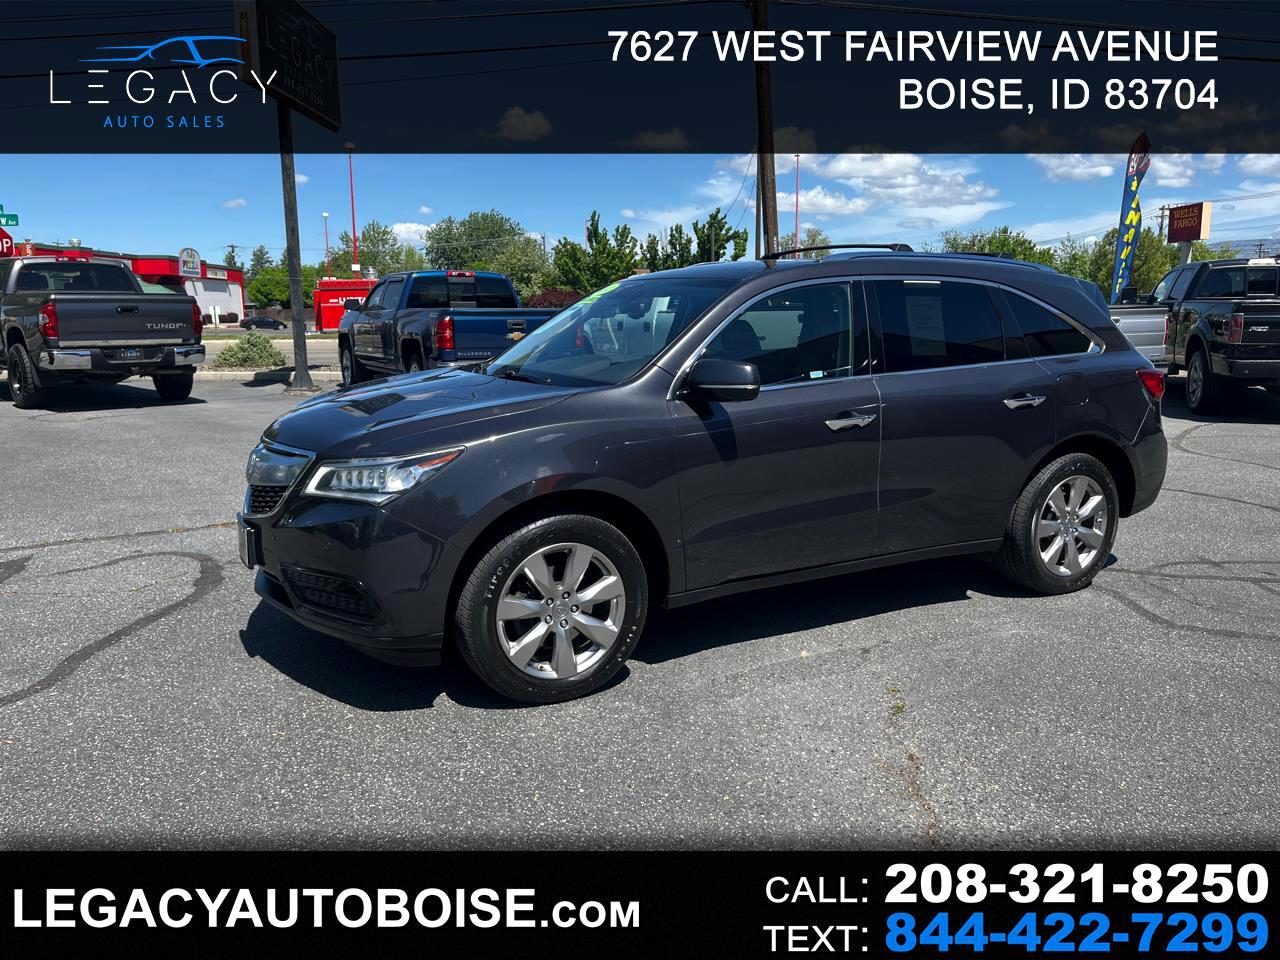 2014 Acura MDX SH-AWD 6-Spd AT w/Advance Package